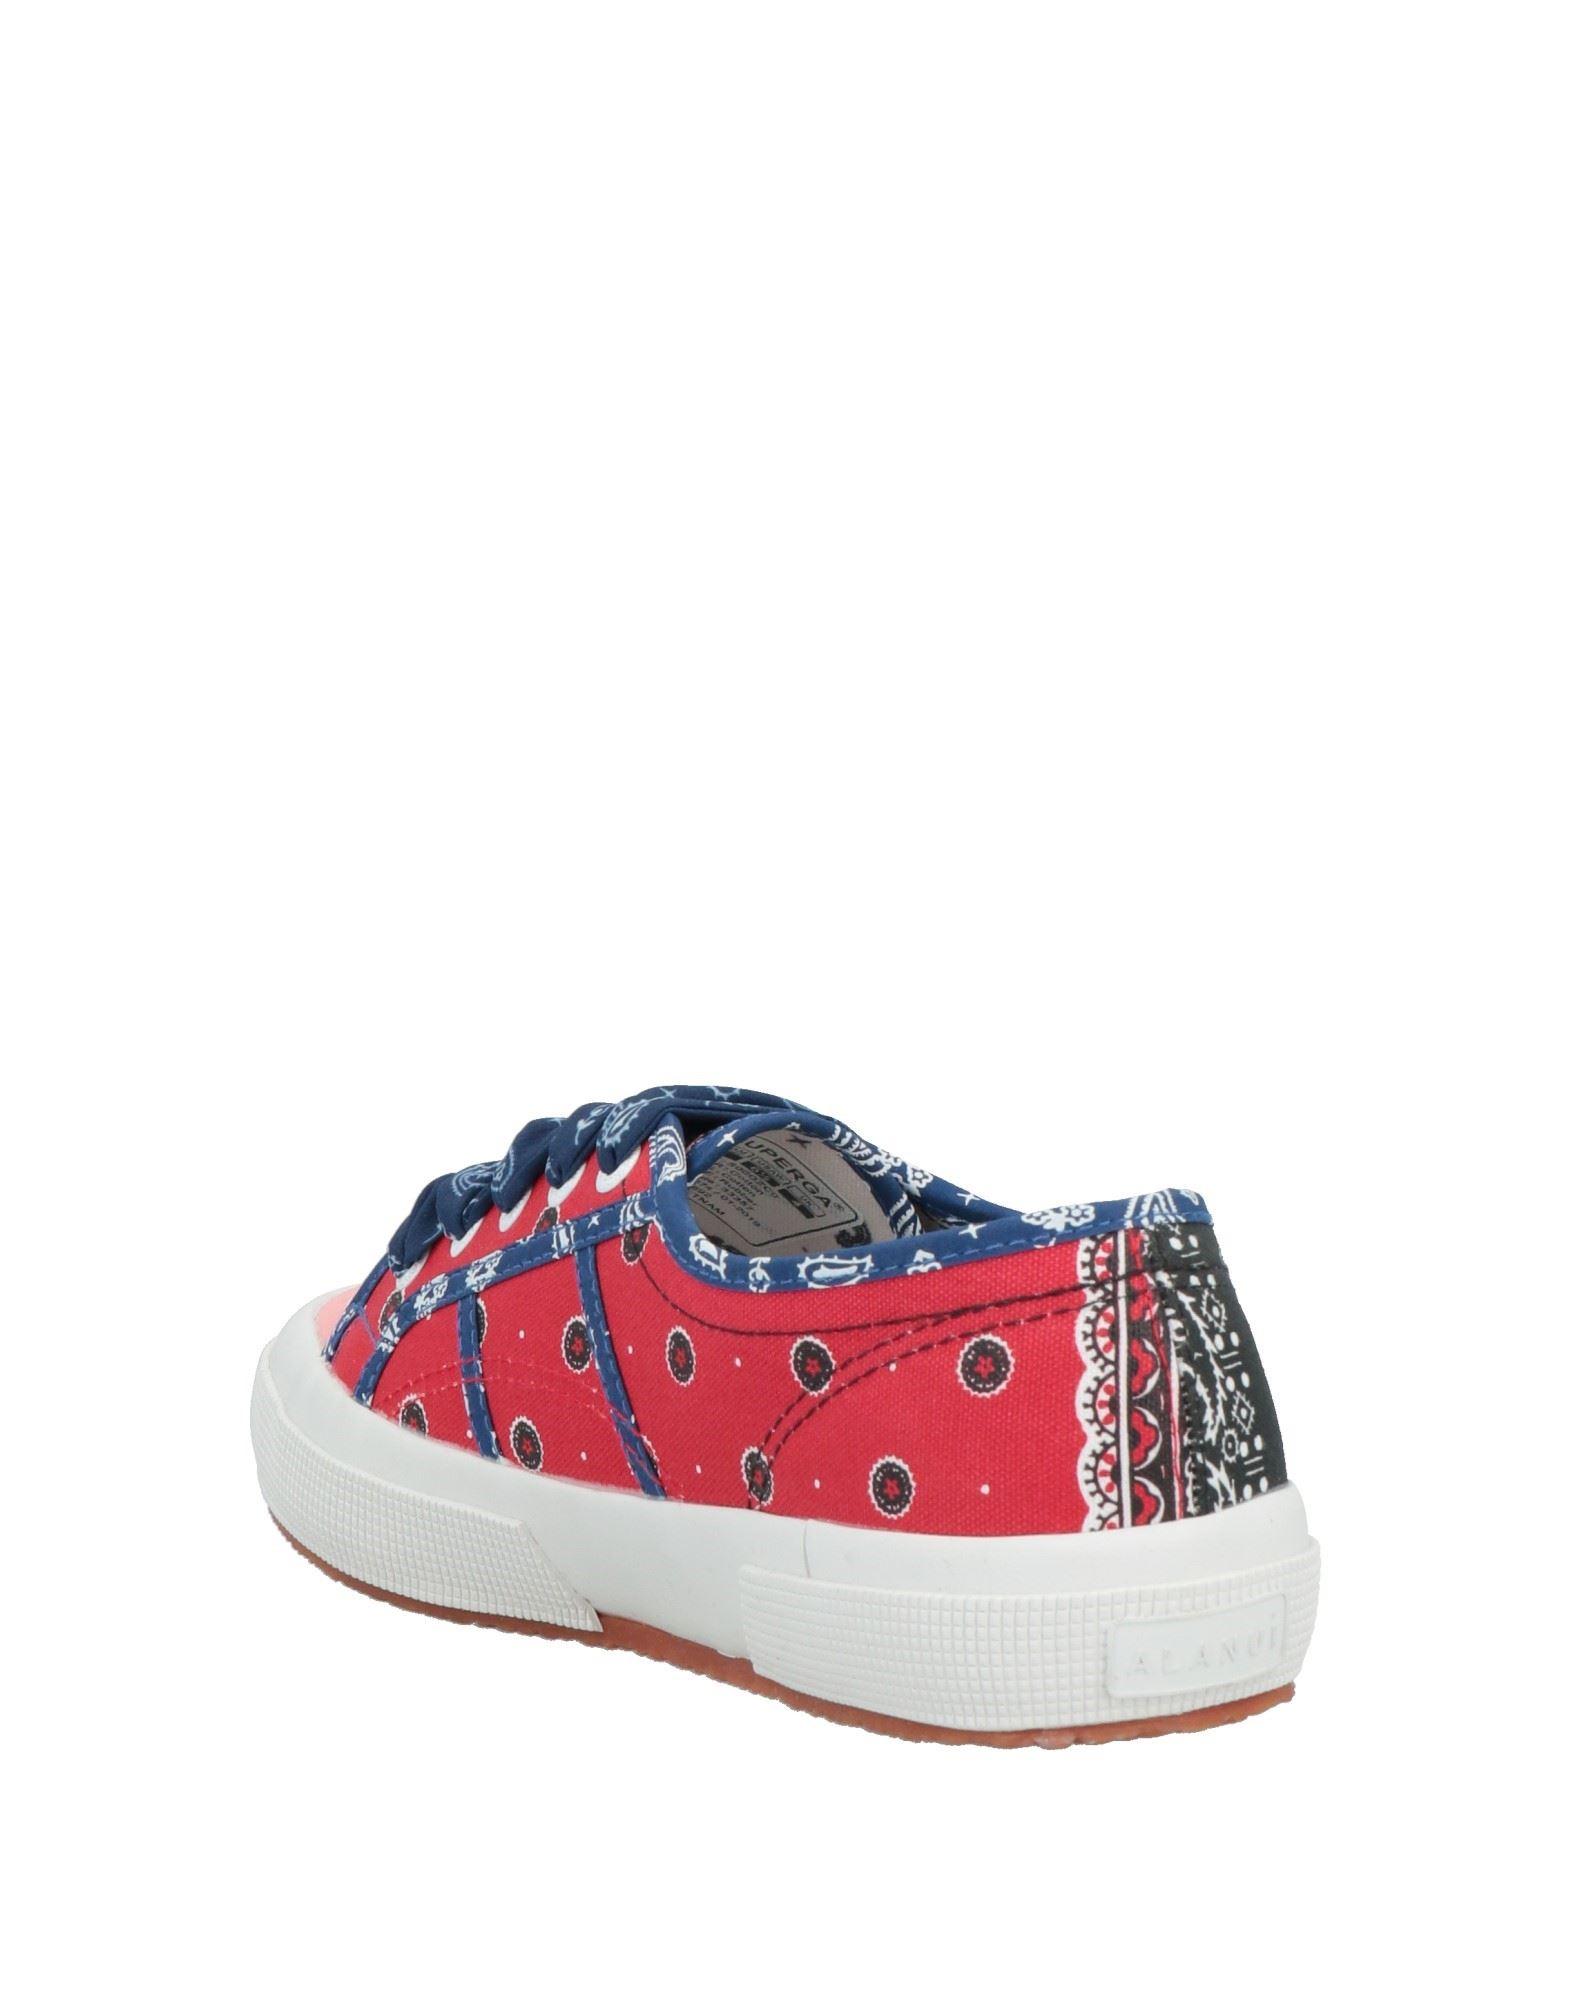 Superga x Alanui Canvas Sneakers in Red | Lyst